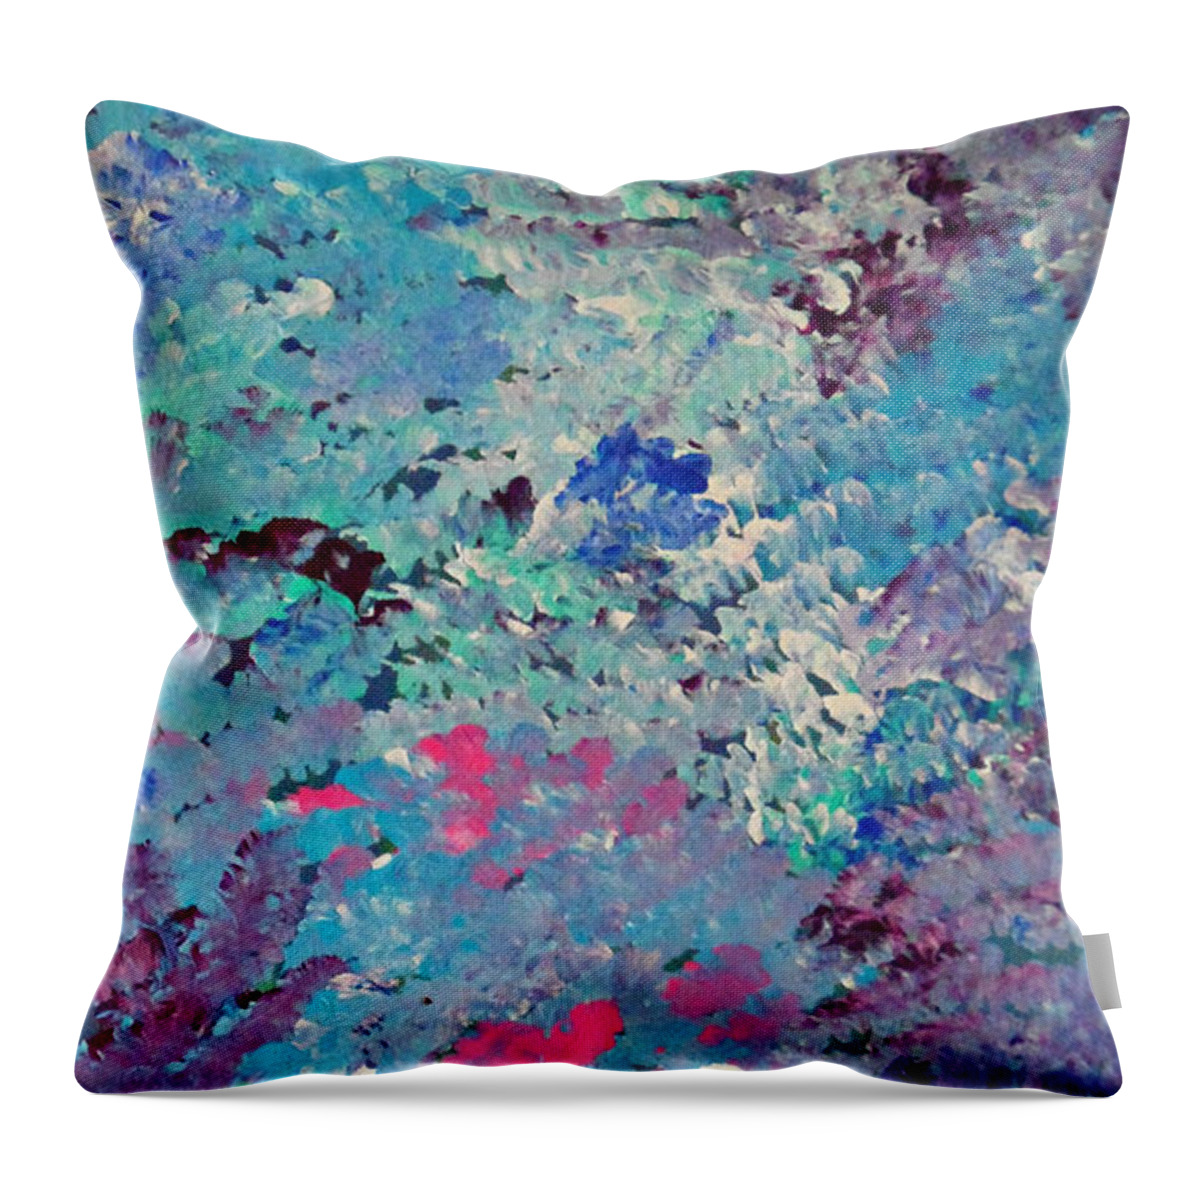 Waves Throw Pillow featuring the painting Cy Lantyca 5 by Cyryn Fyrcyd